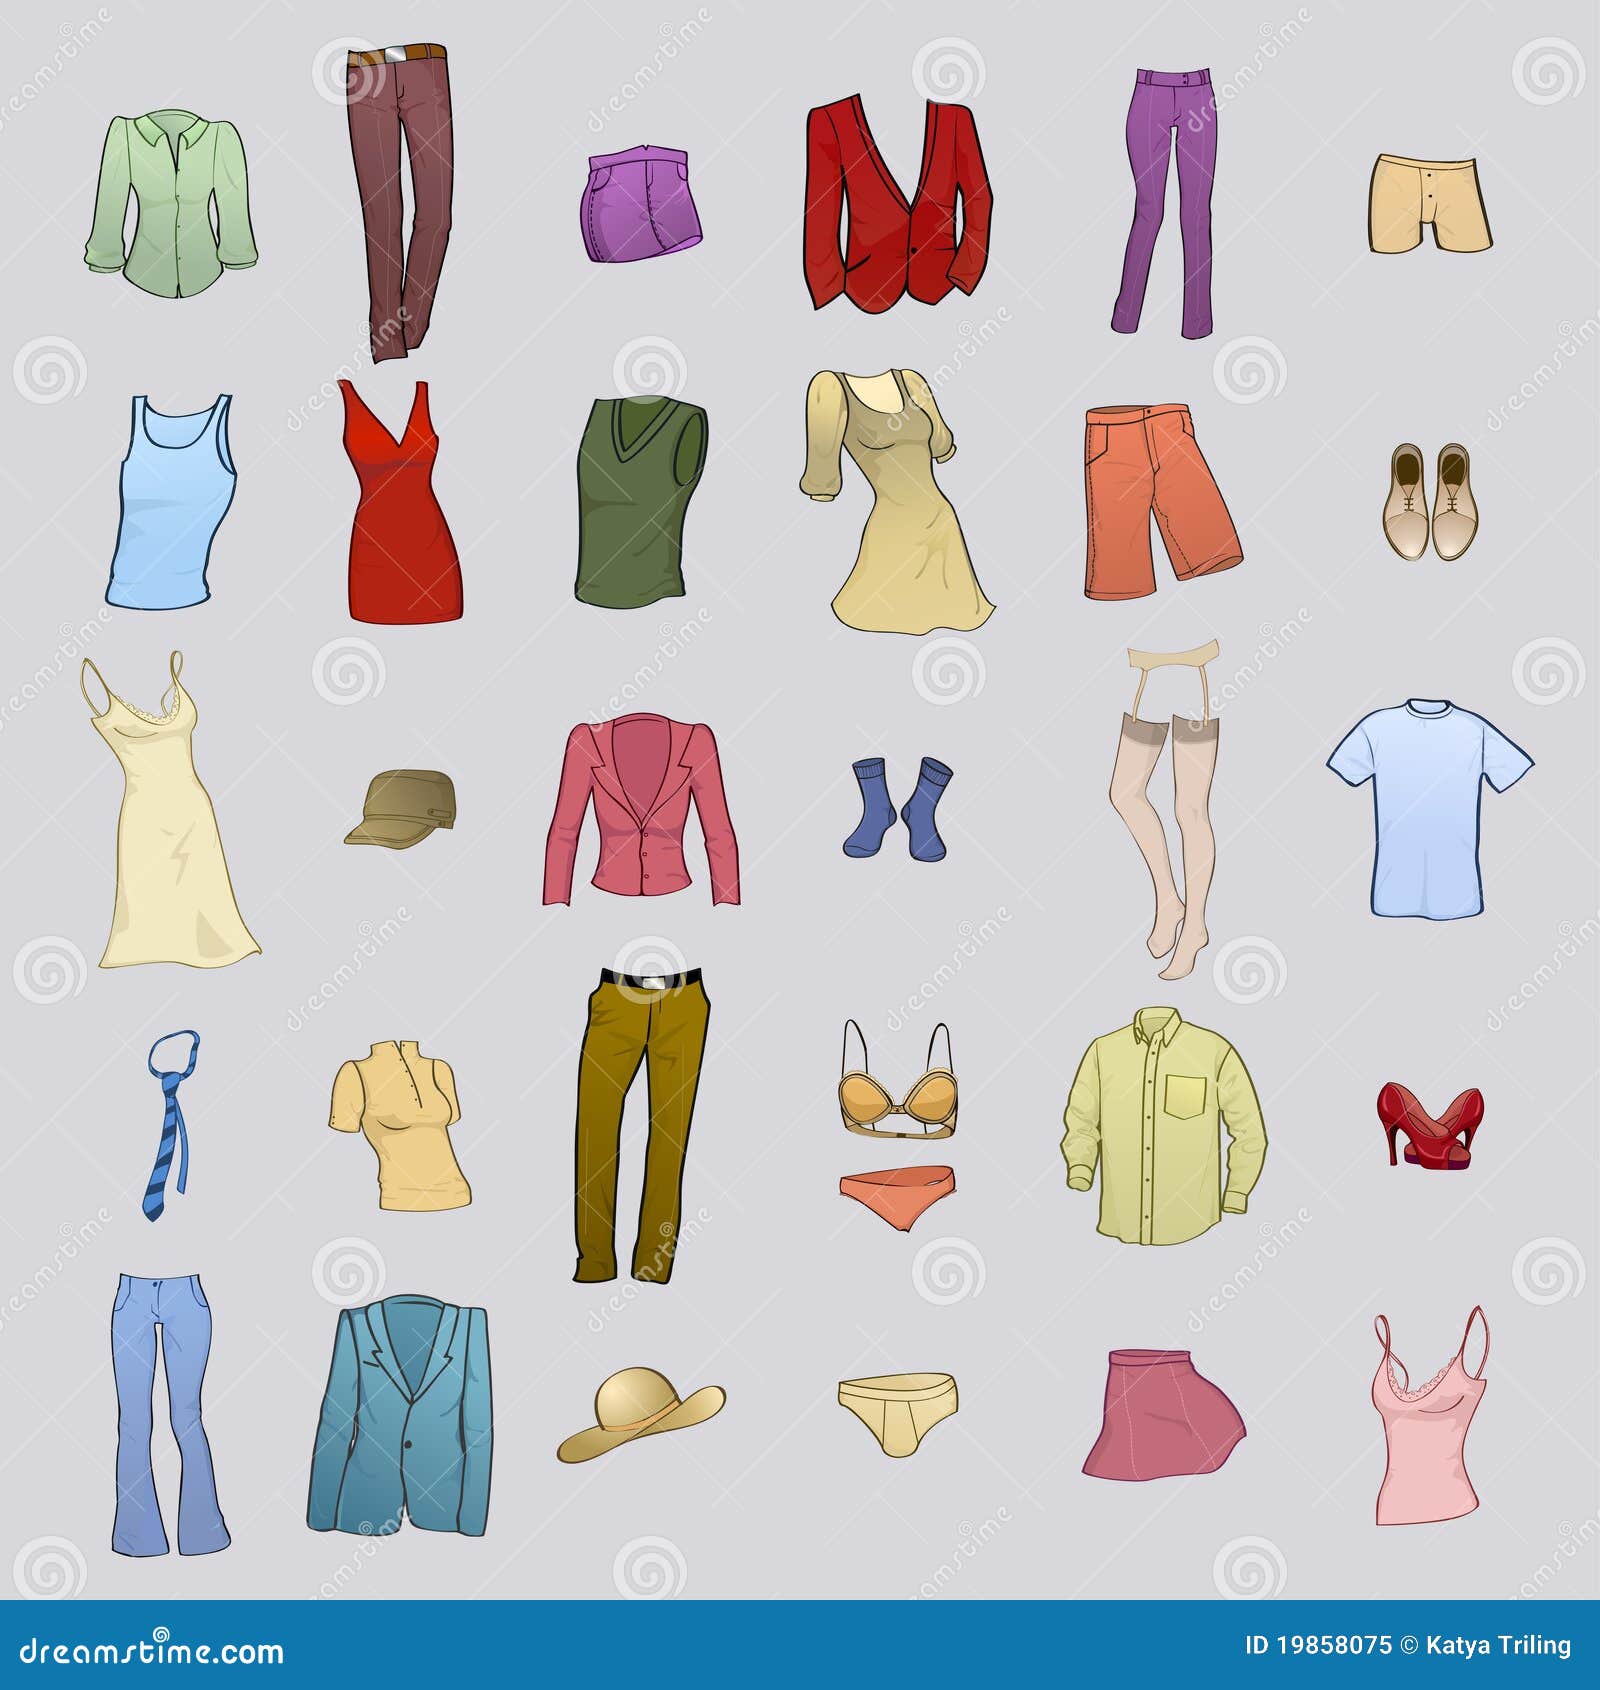 clothes icons vector